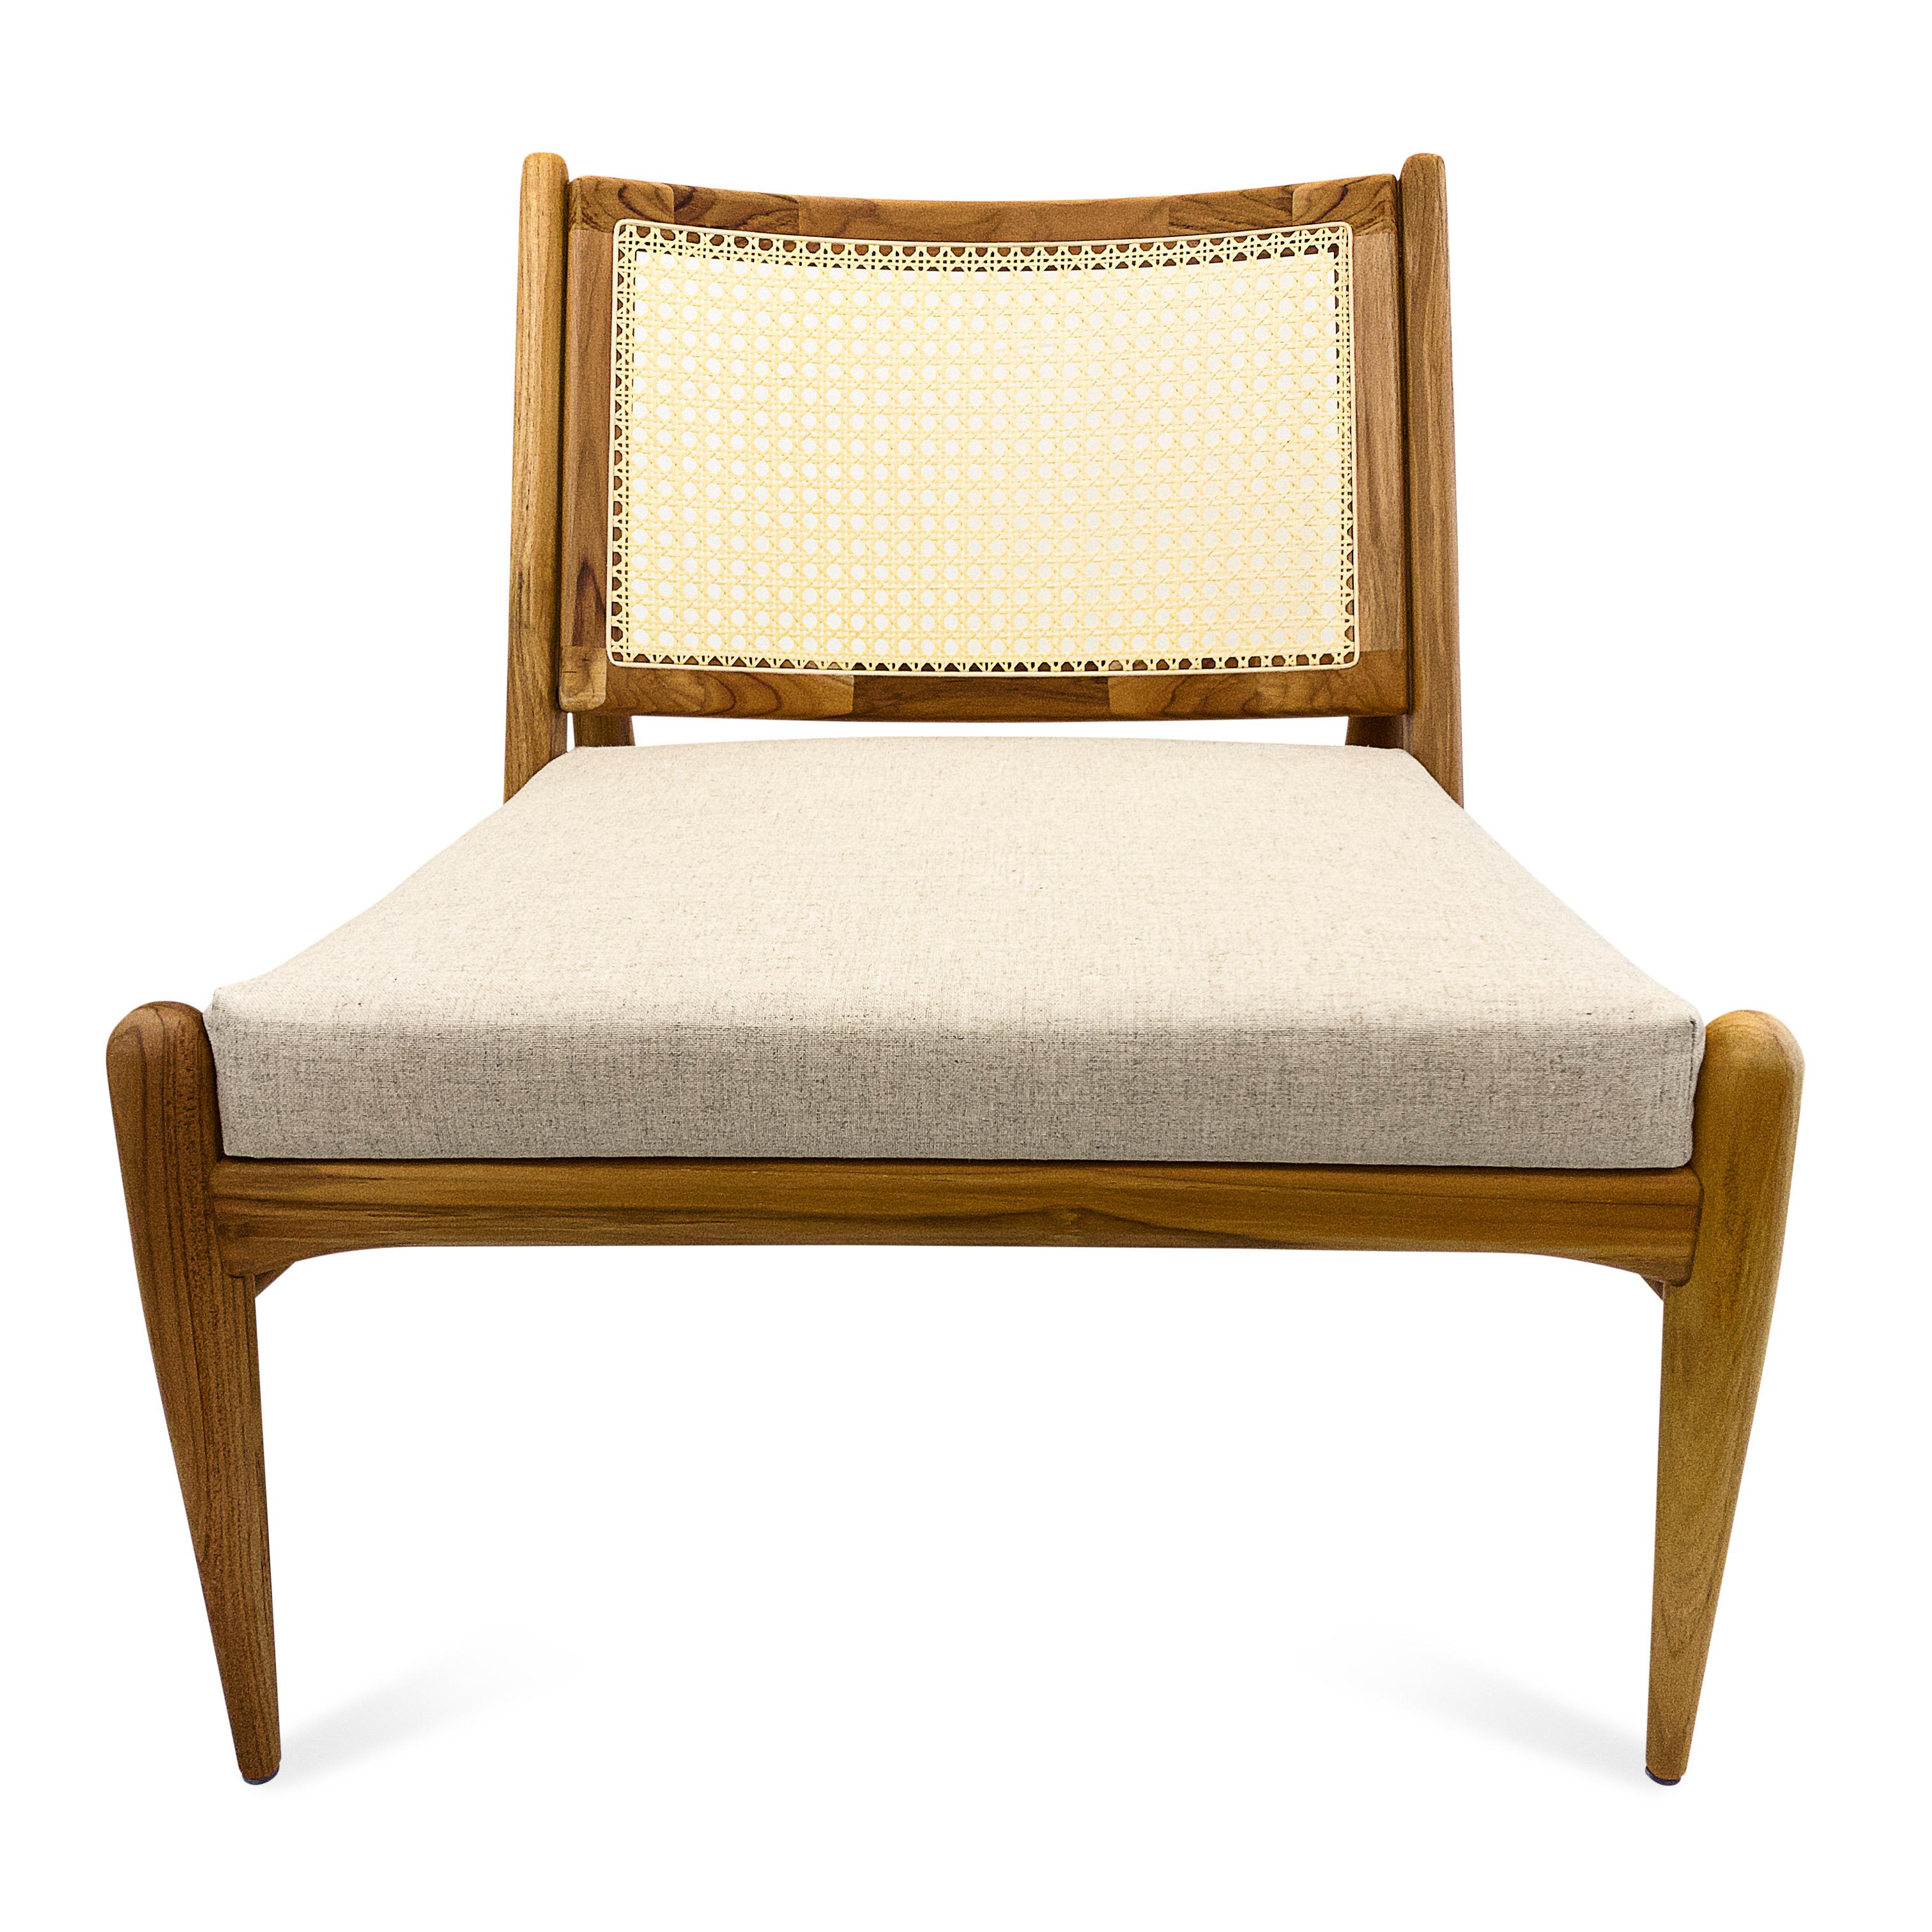 Brazilian Donna Cane-Back Chair in Teak Wood Finish with Oatmeal Fabric Seat For Sale